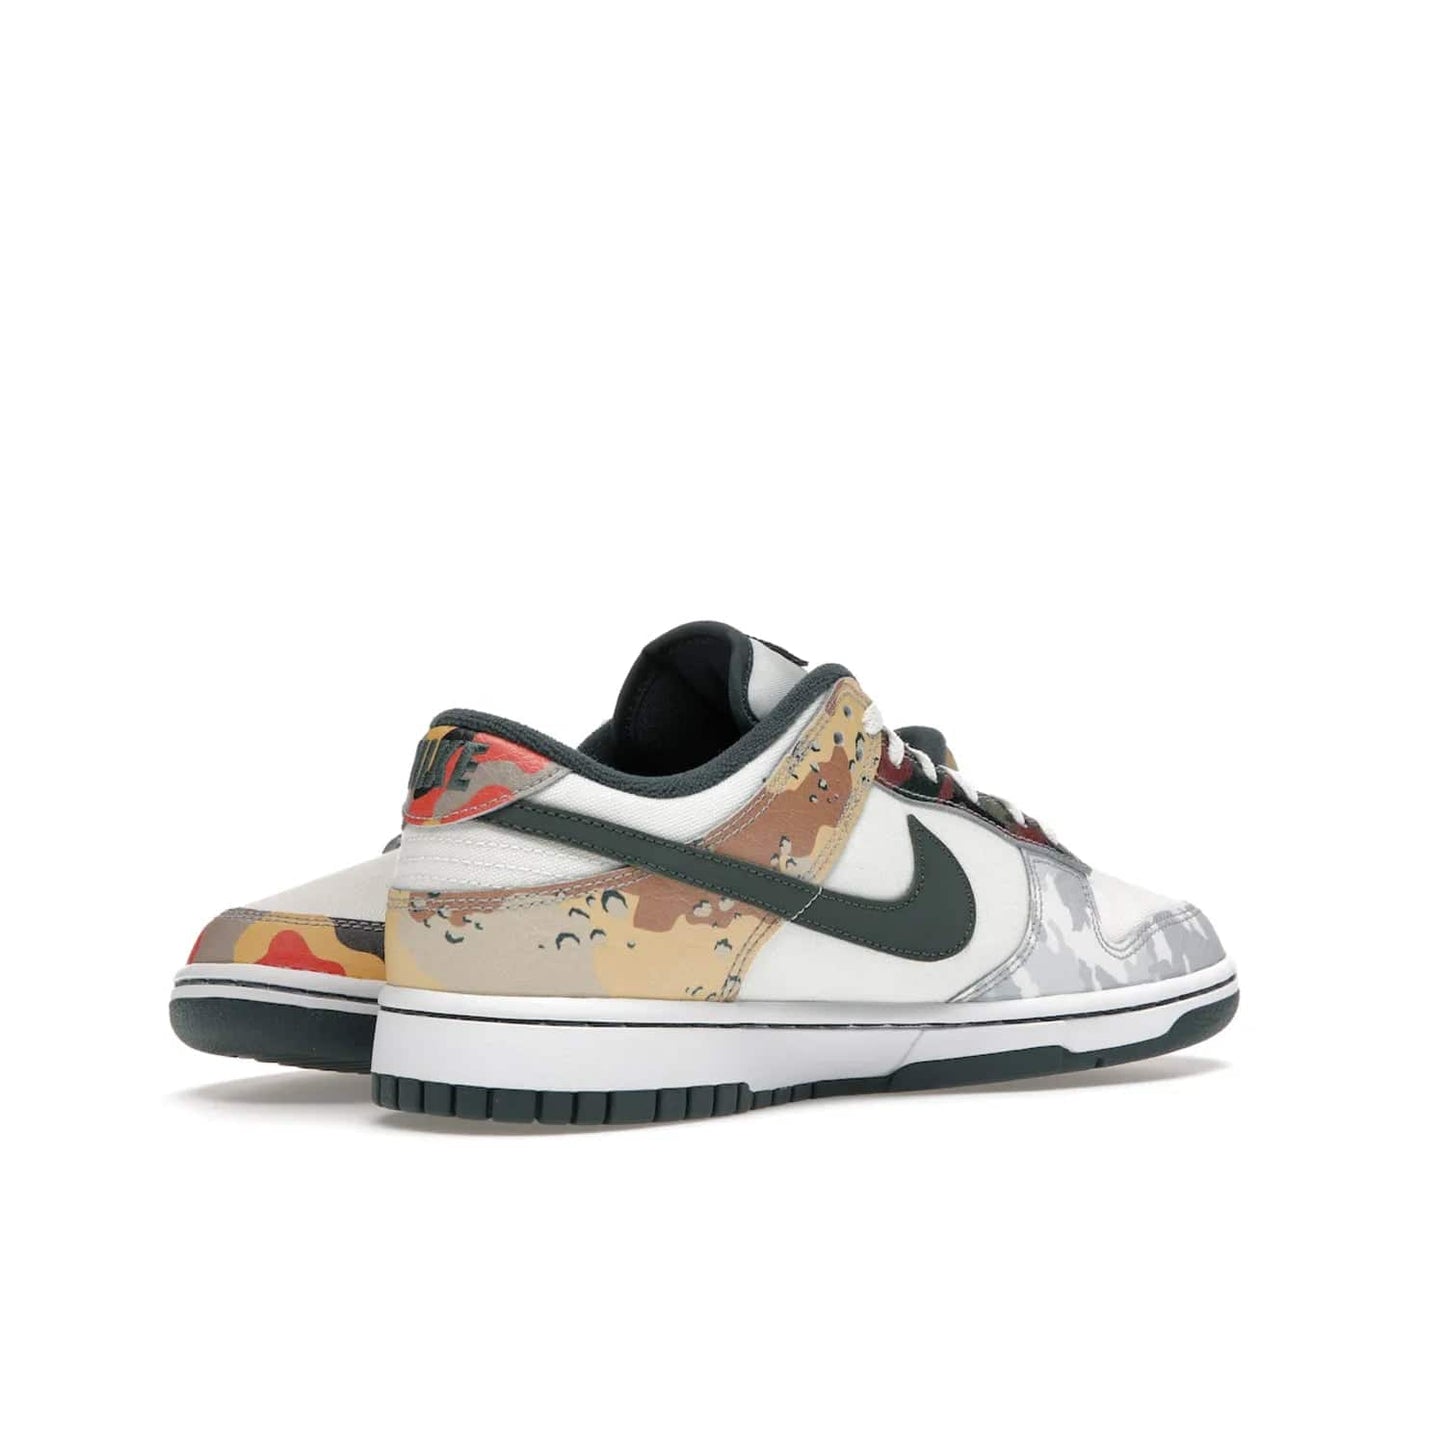 Nike Dunk Low SE Sail Multi-Camo - Image 15 - Only at www.BallersClubKickz.com - Classic design meets statement style in the Nike Dunk Low SE Sail Multi-Camo. White leather base with multi-color camo overlays, vibrant Nike Swooshes, and orange Nike embroidery. Get yours August 2021.